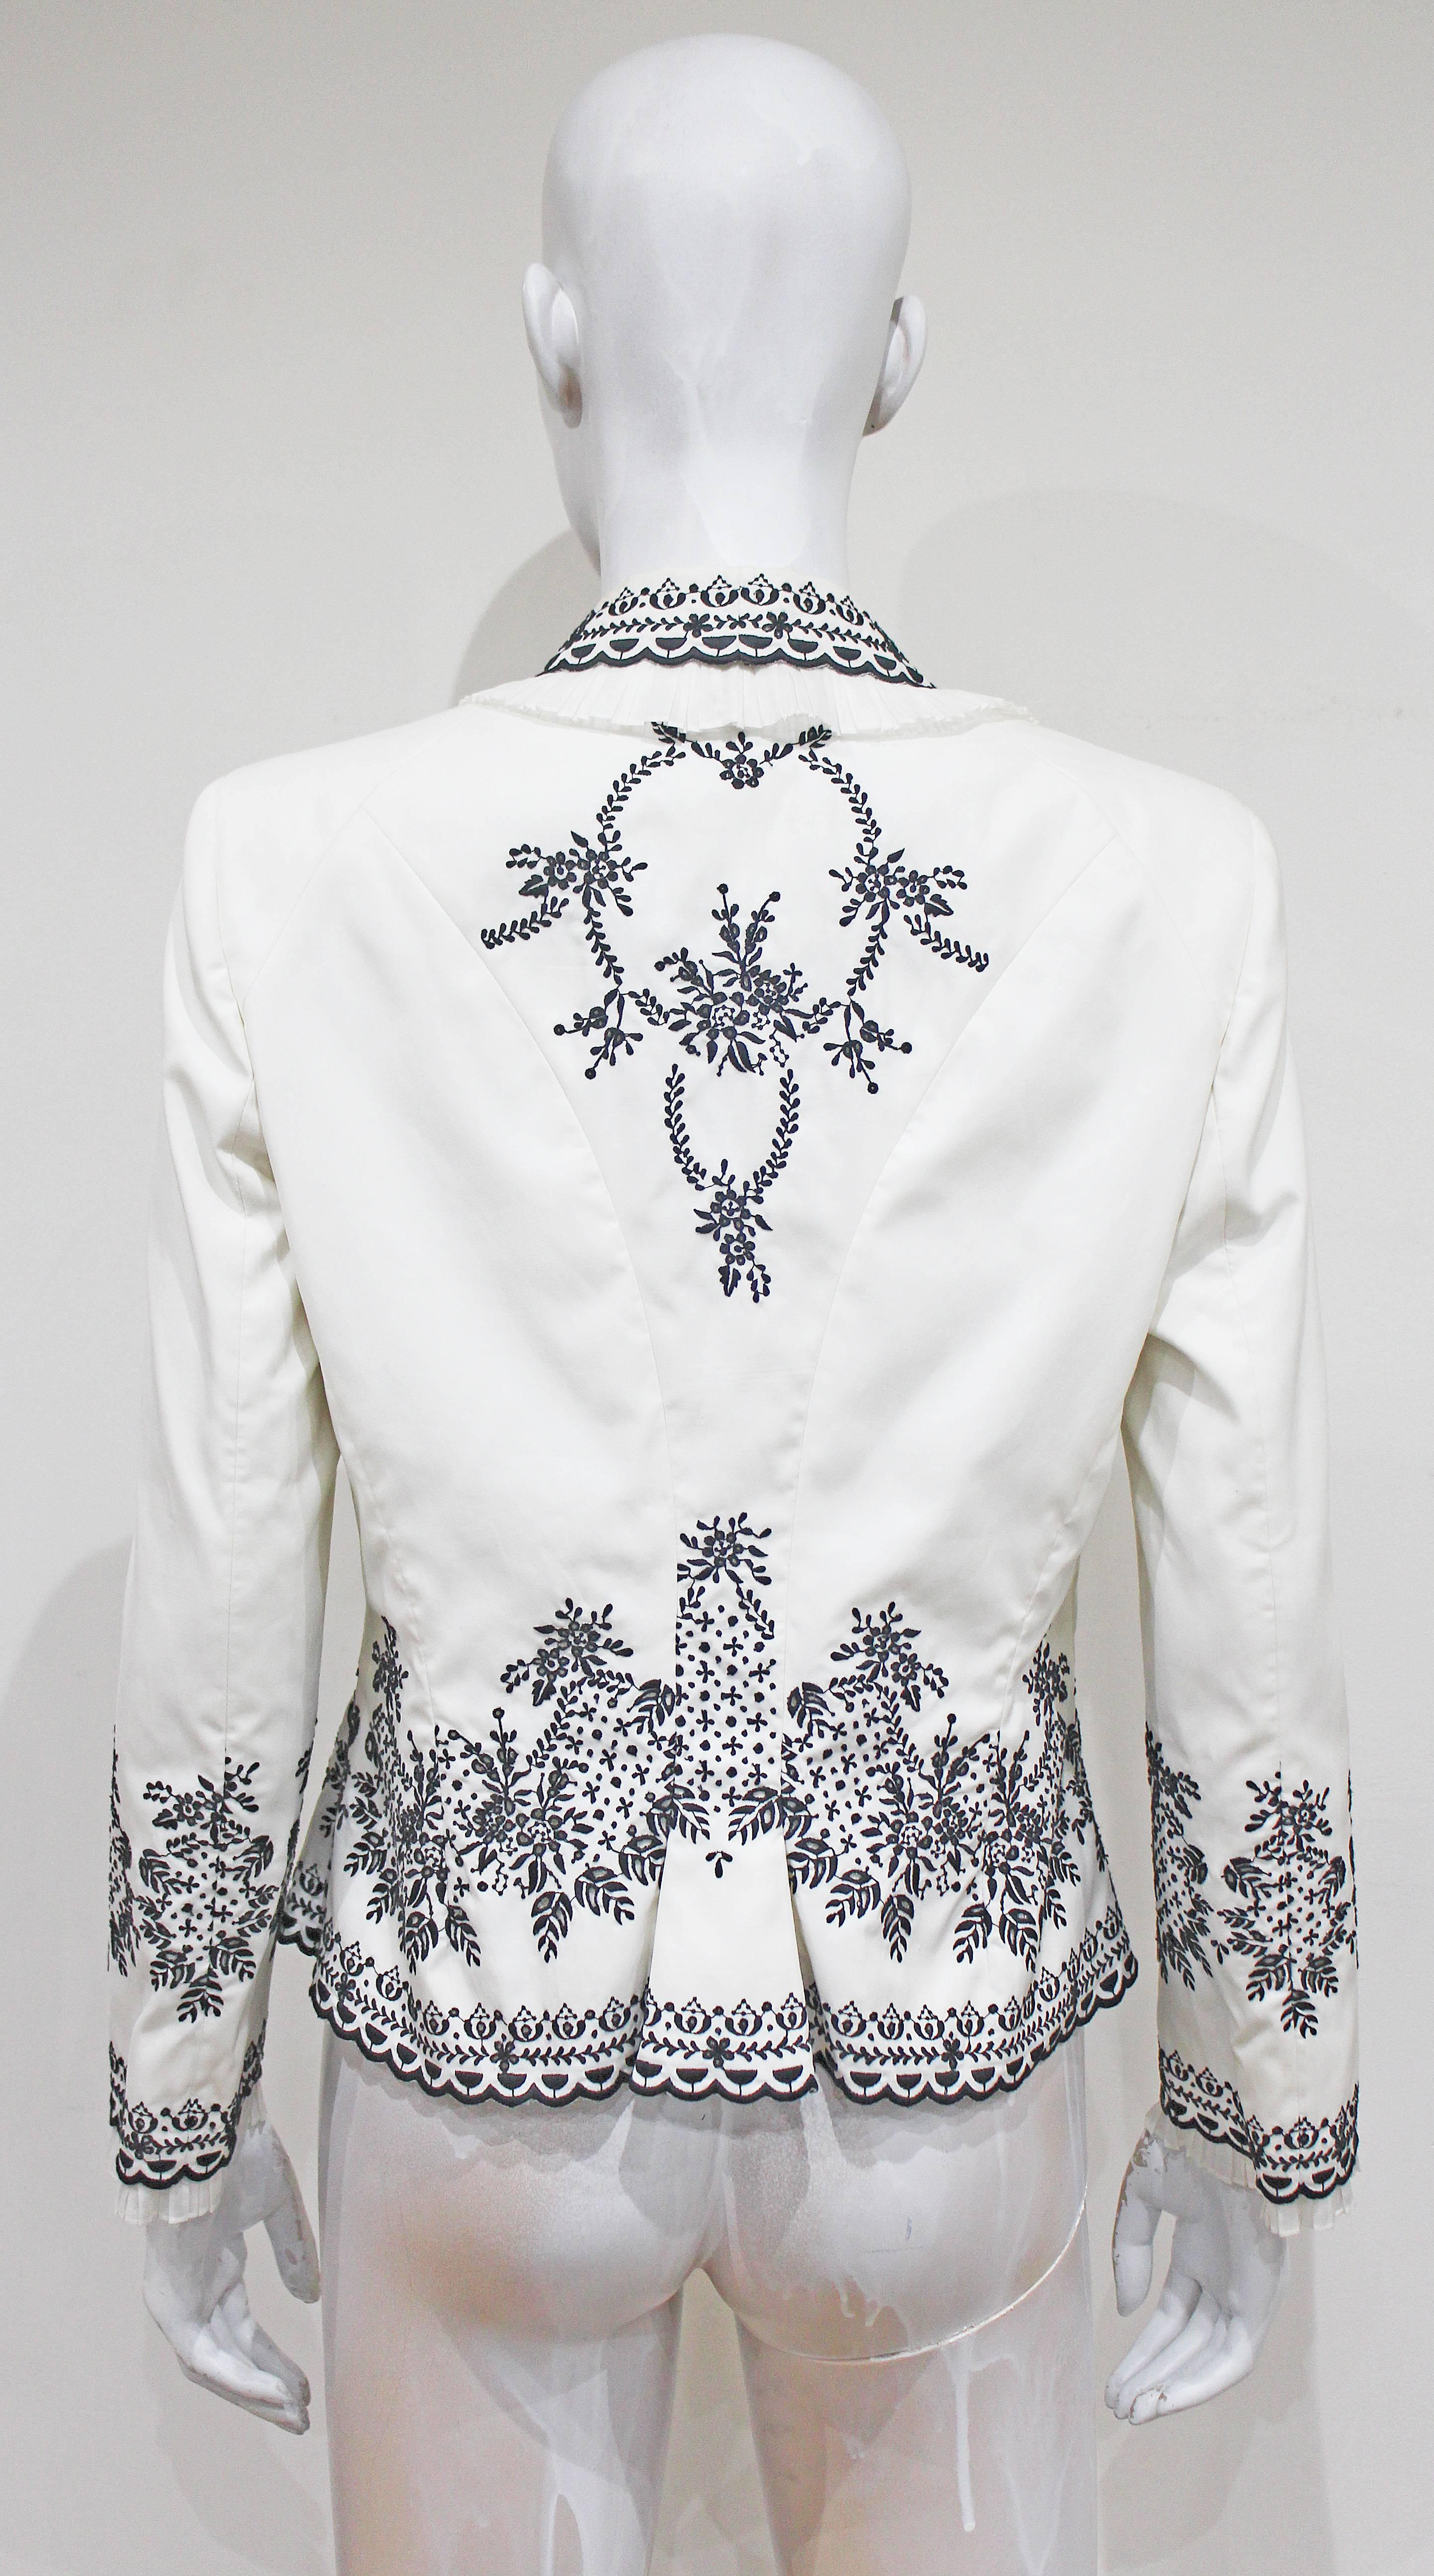 Alexander McQueen embroidered tailored 'Sarabande' jacket, c. 2007 In New Condition For Sale In London, GB